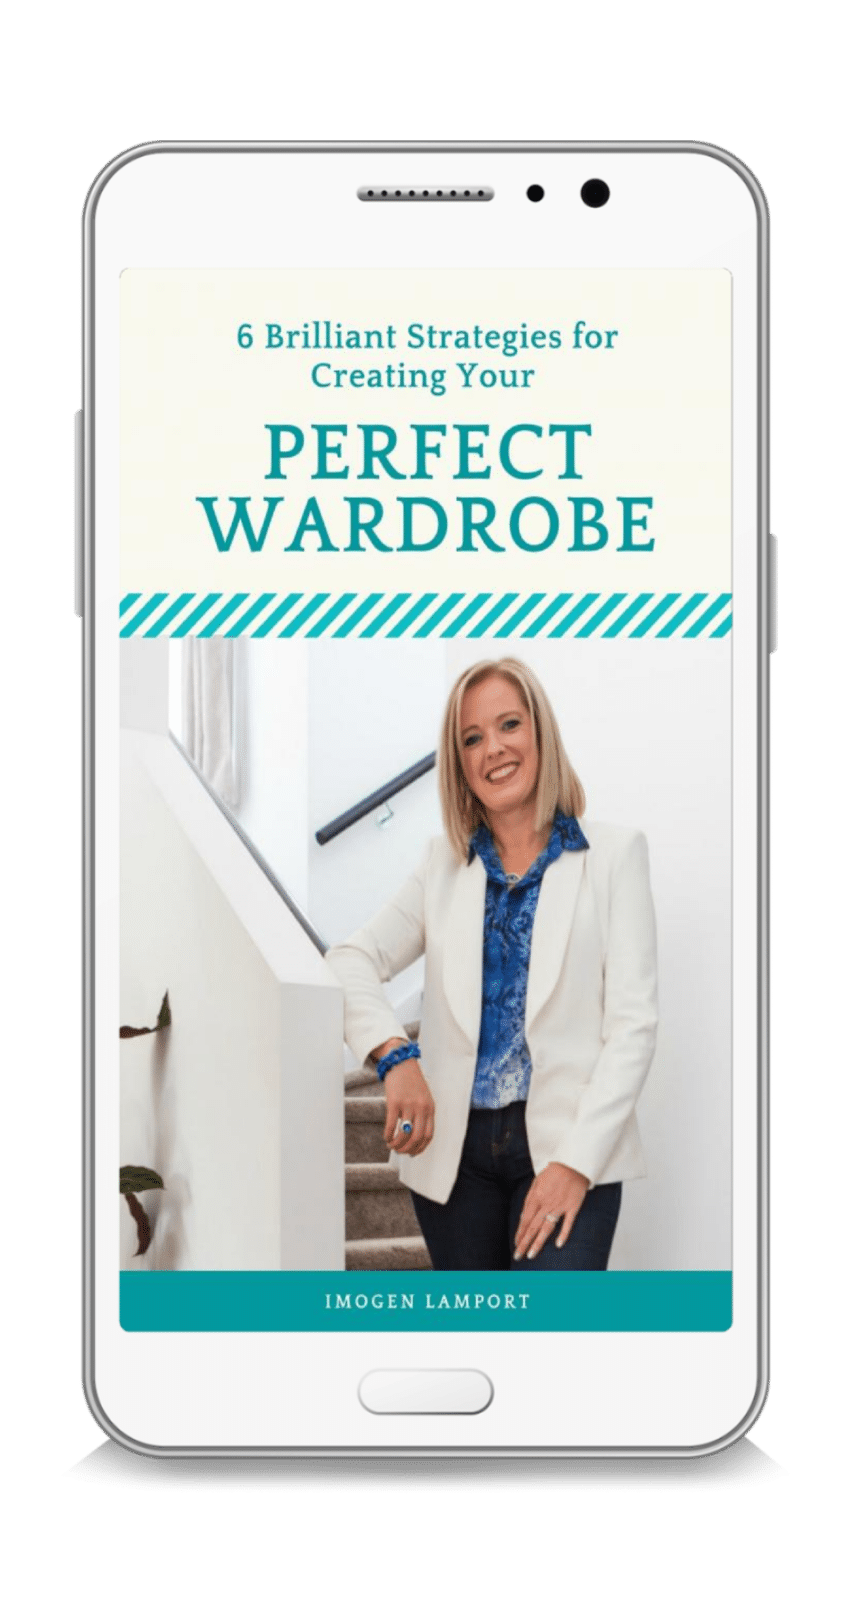 6 Brilliant Strategies for Creating your Perfect Wardrobe